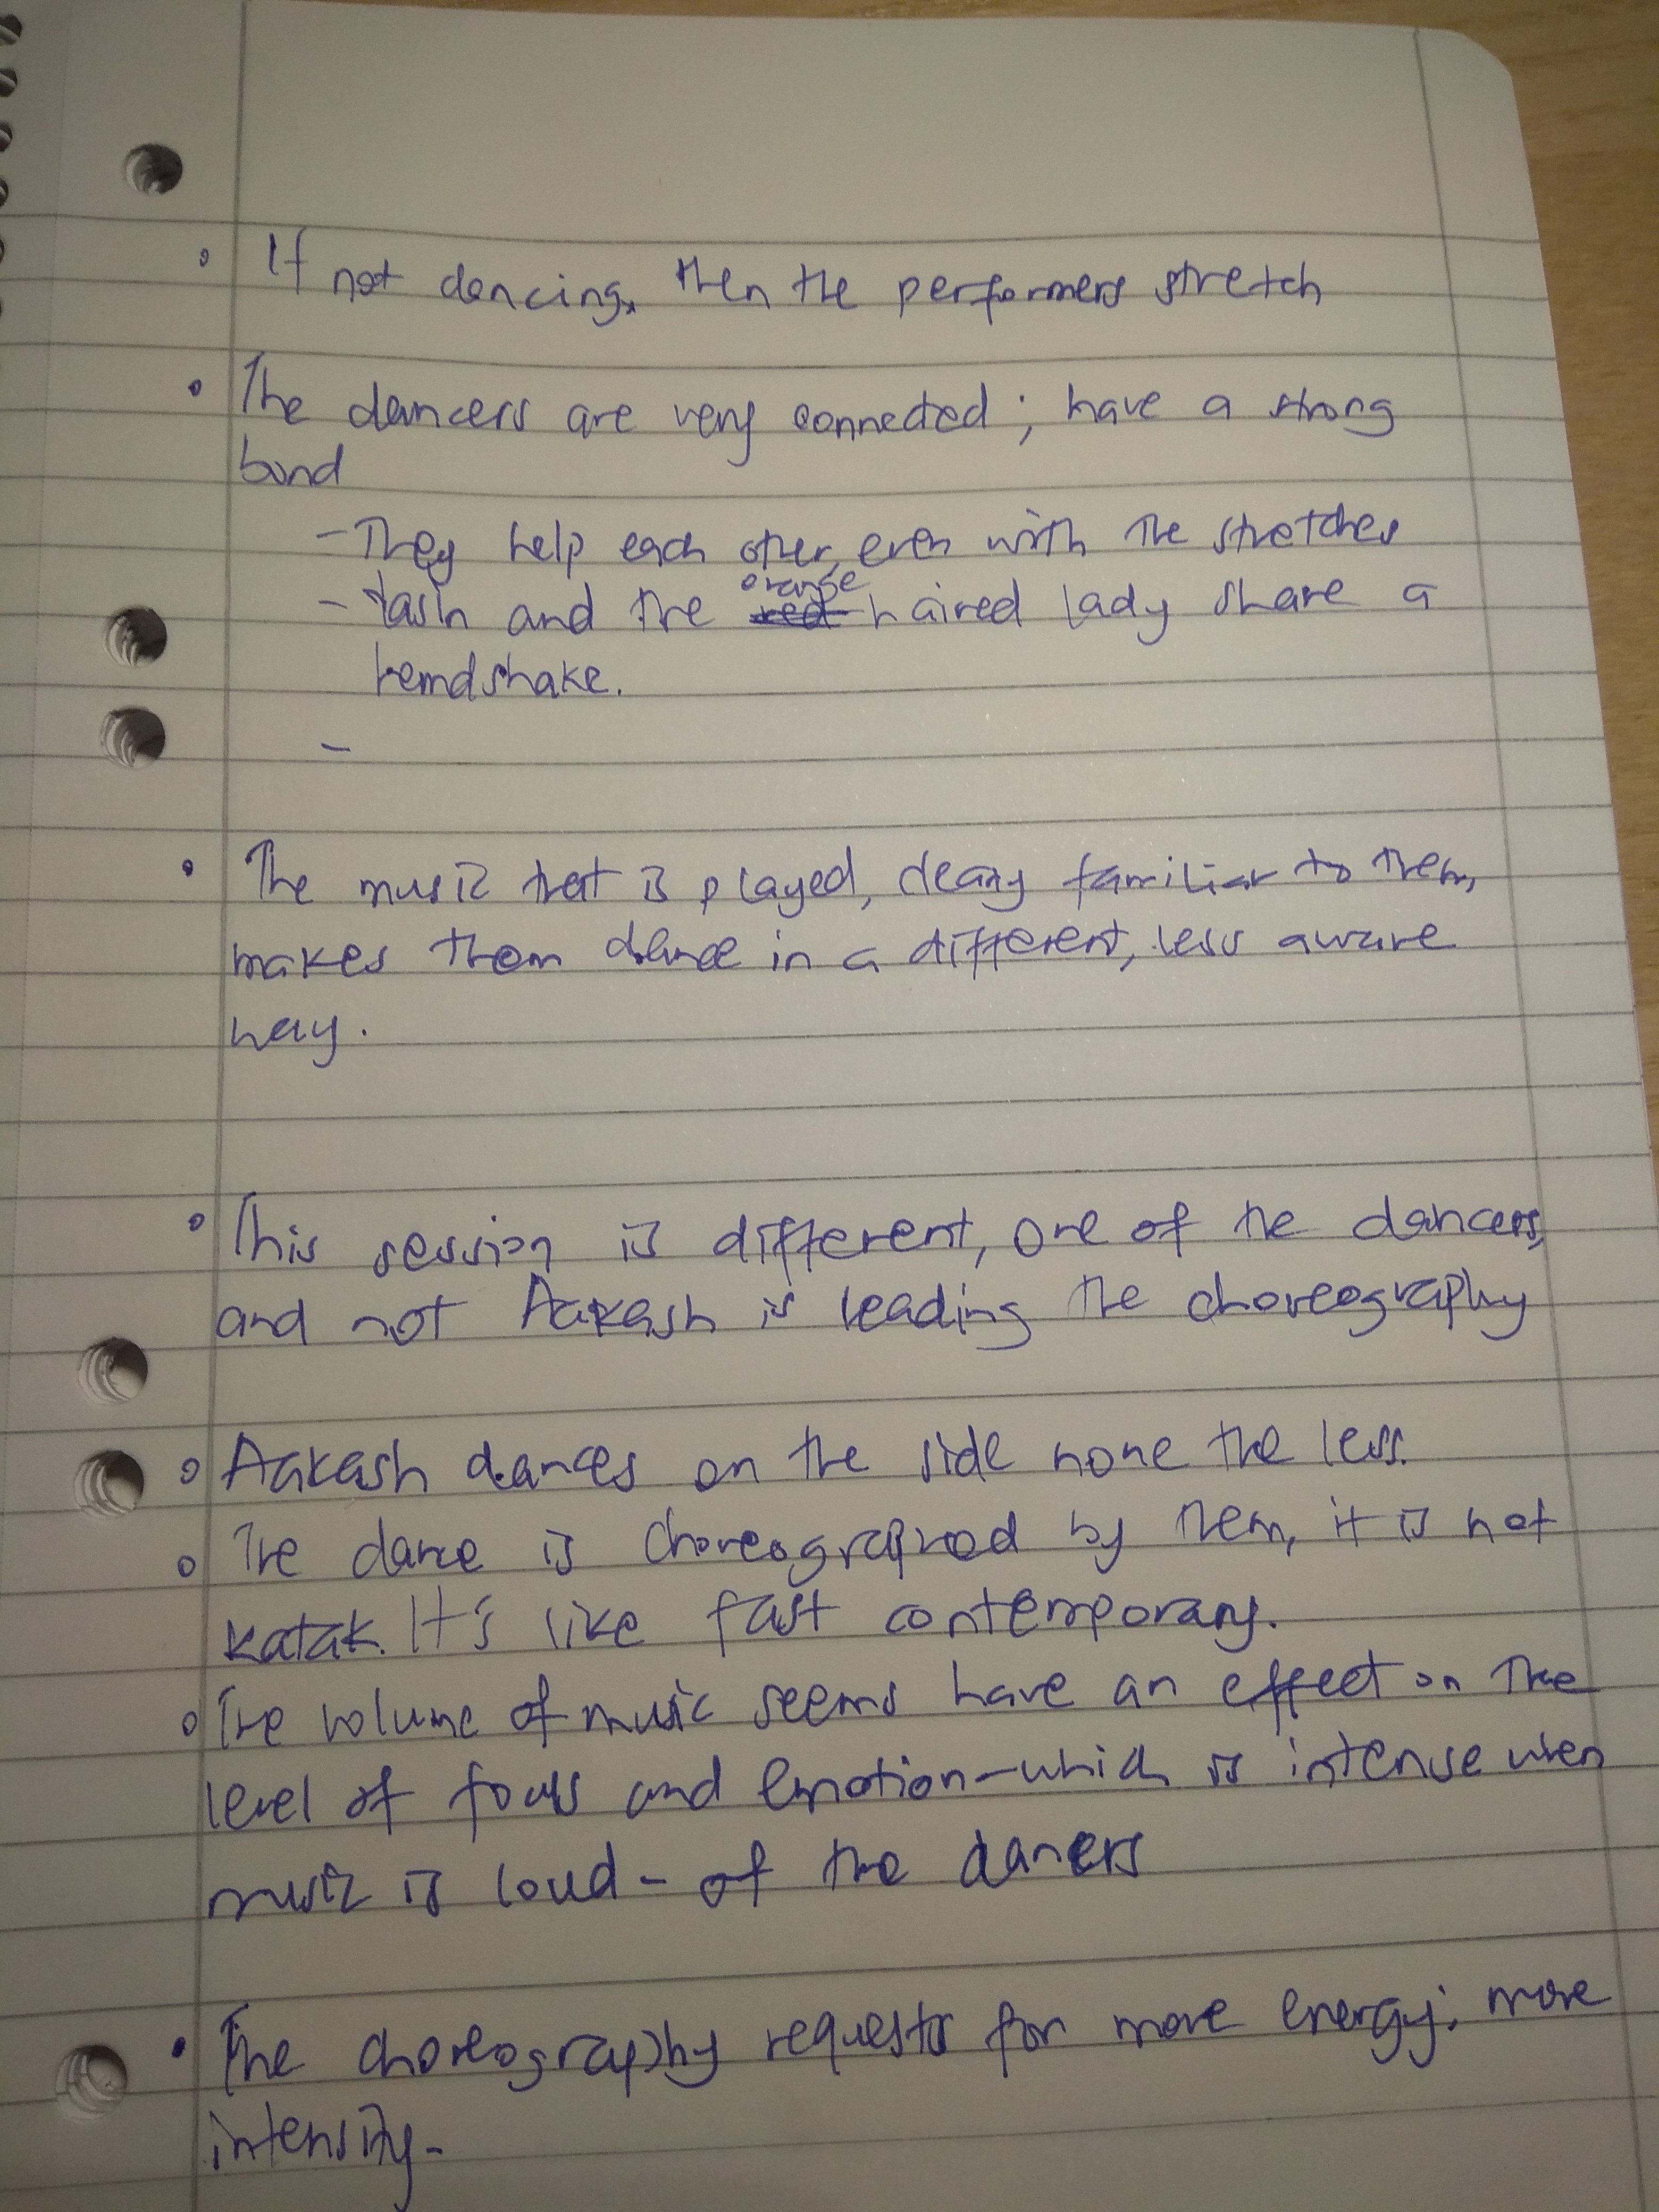 Second page notes on rehearsal session involving more of the Turkish dancers-group performances. Less of Katak